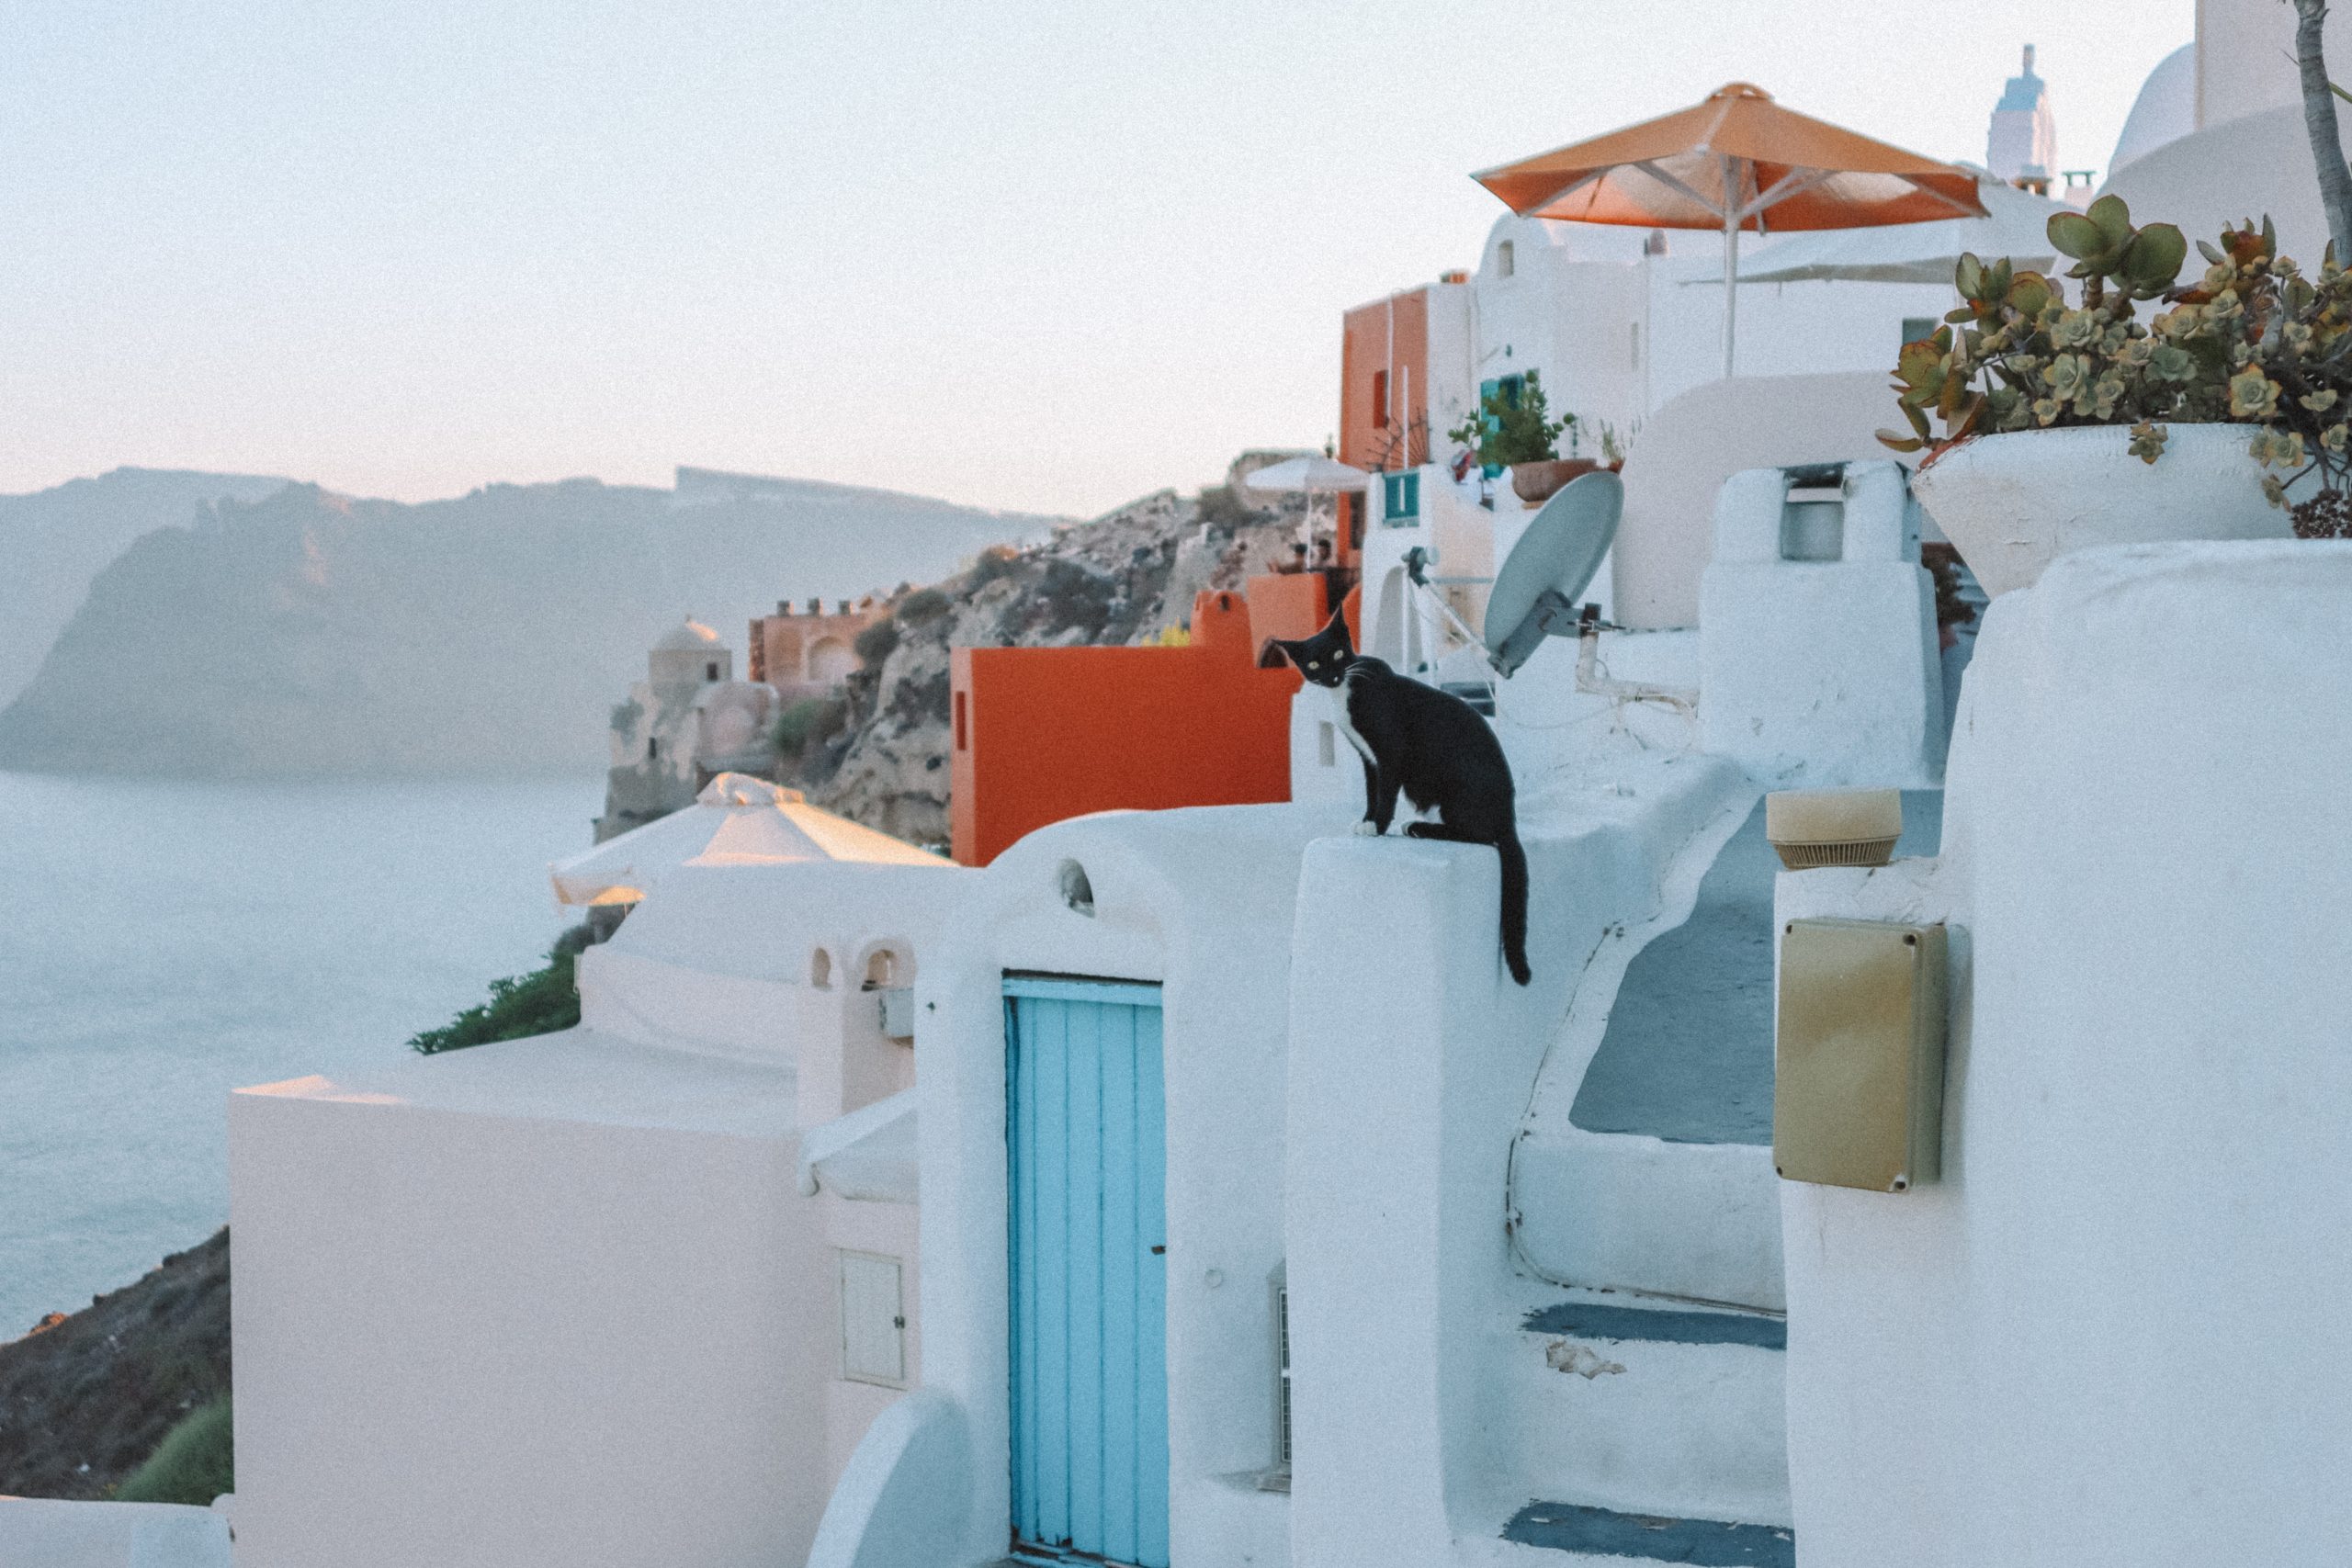 A cat sat on a whitewashed building in Oia, Santorini.